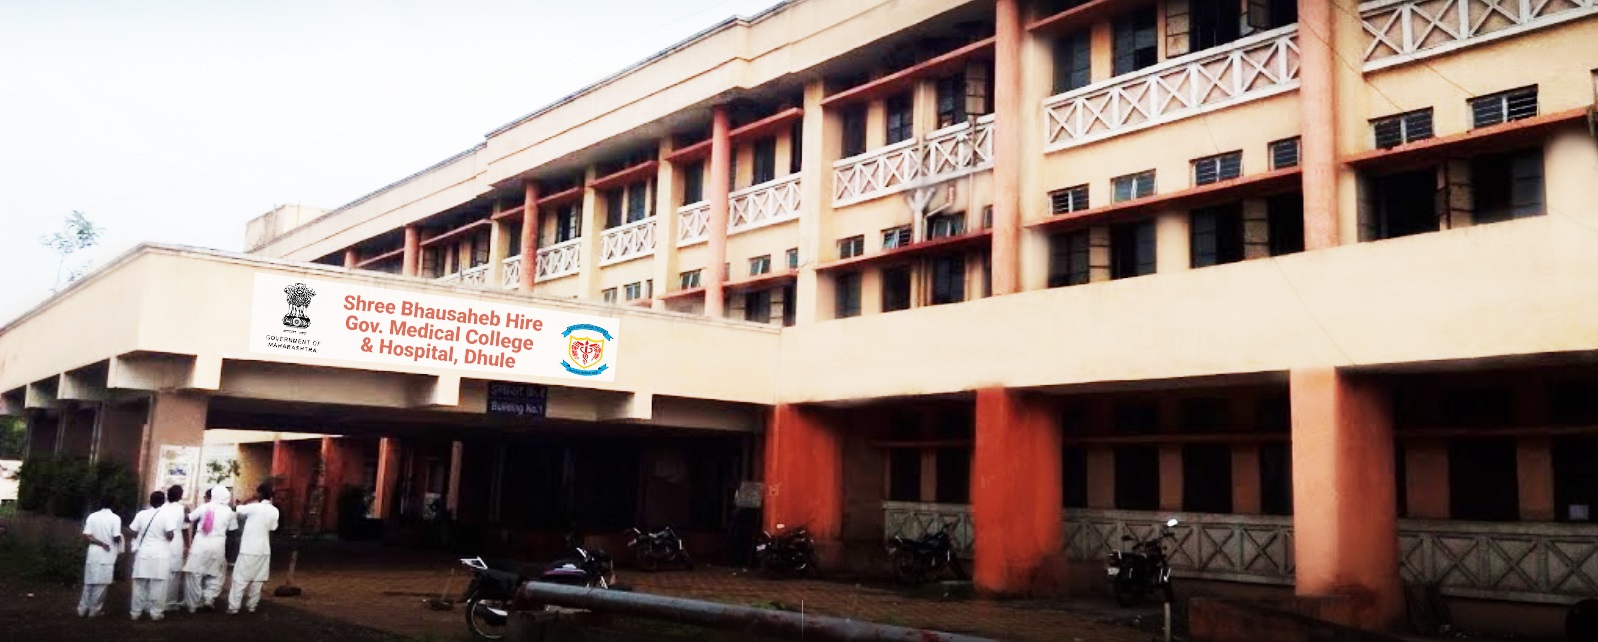 Shri Bhausaheb Hire Government Medical College, Dhule Image